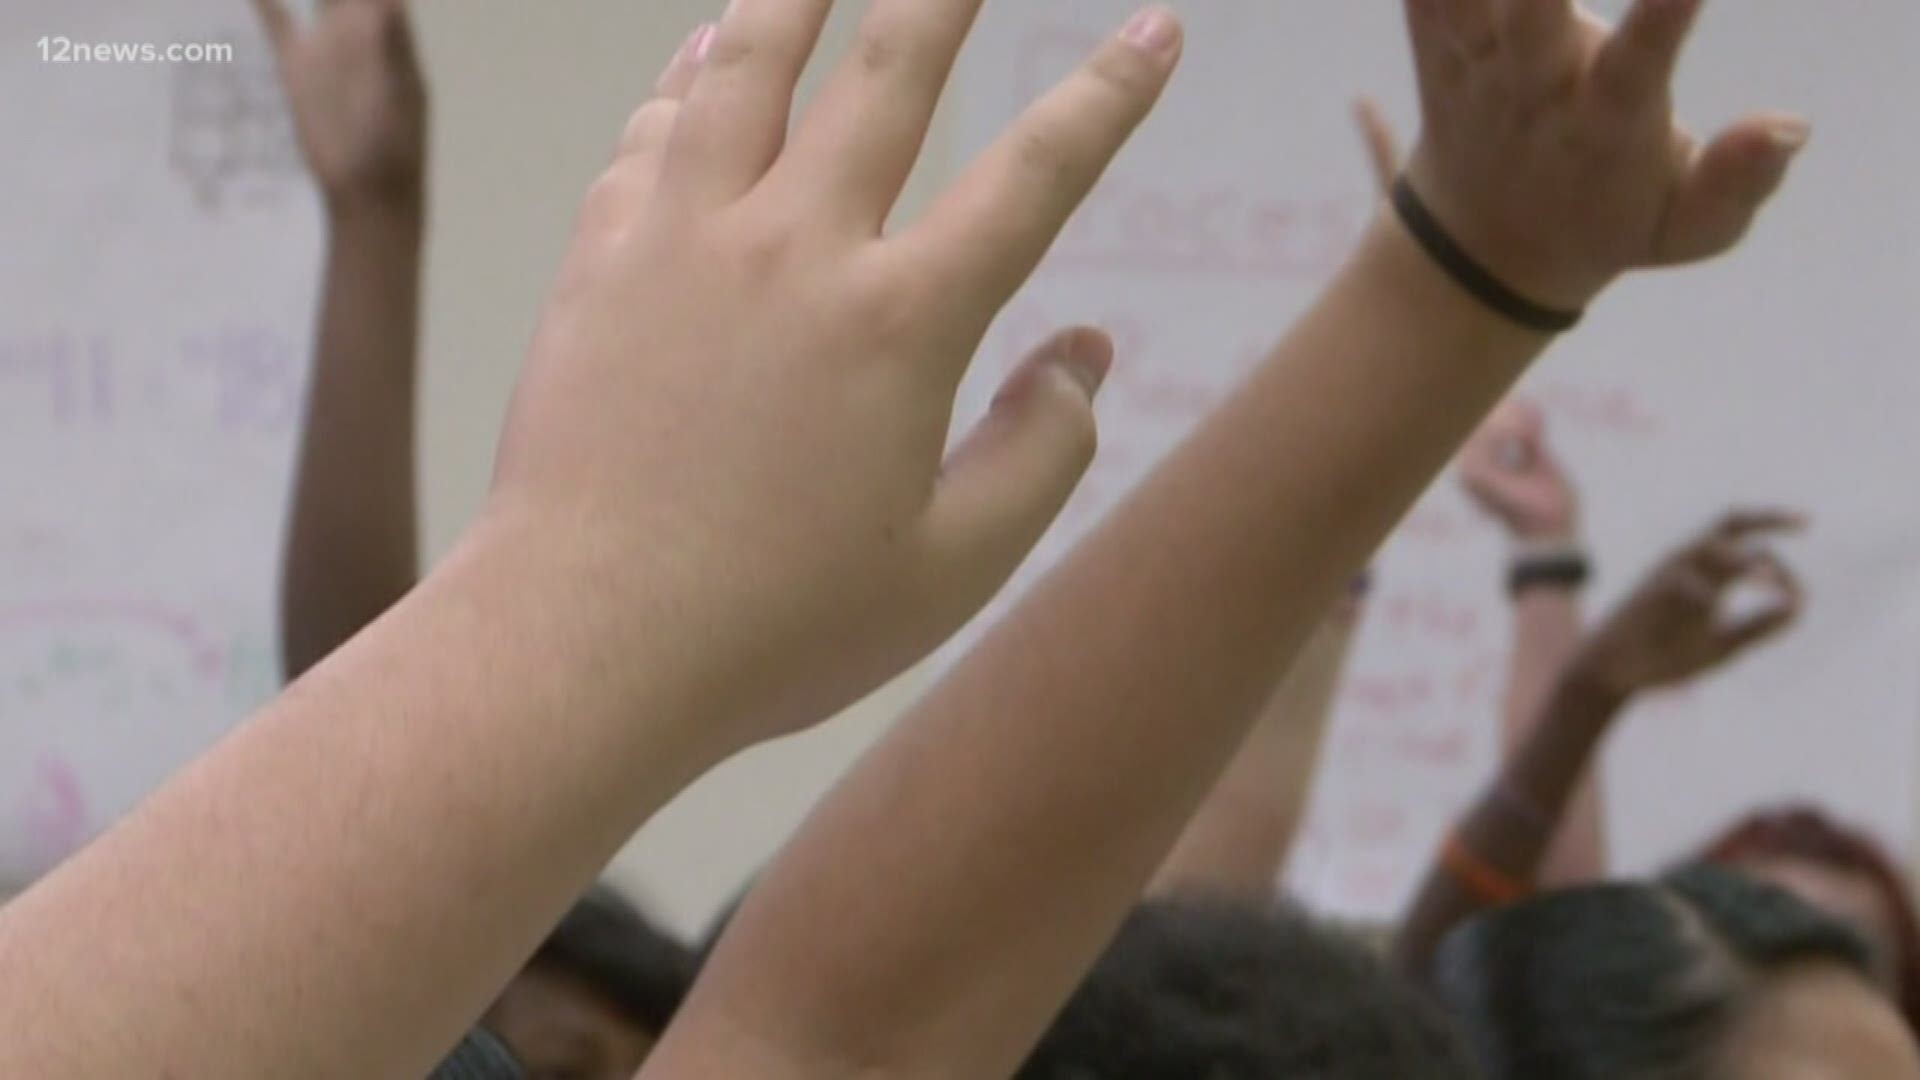 Schools across Arizona are handling education, classes and grading differently. Some students are at a disadvantage.